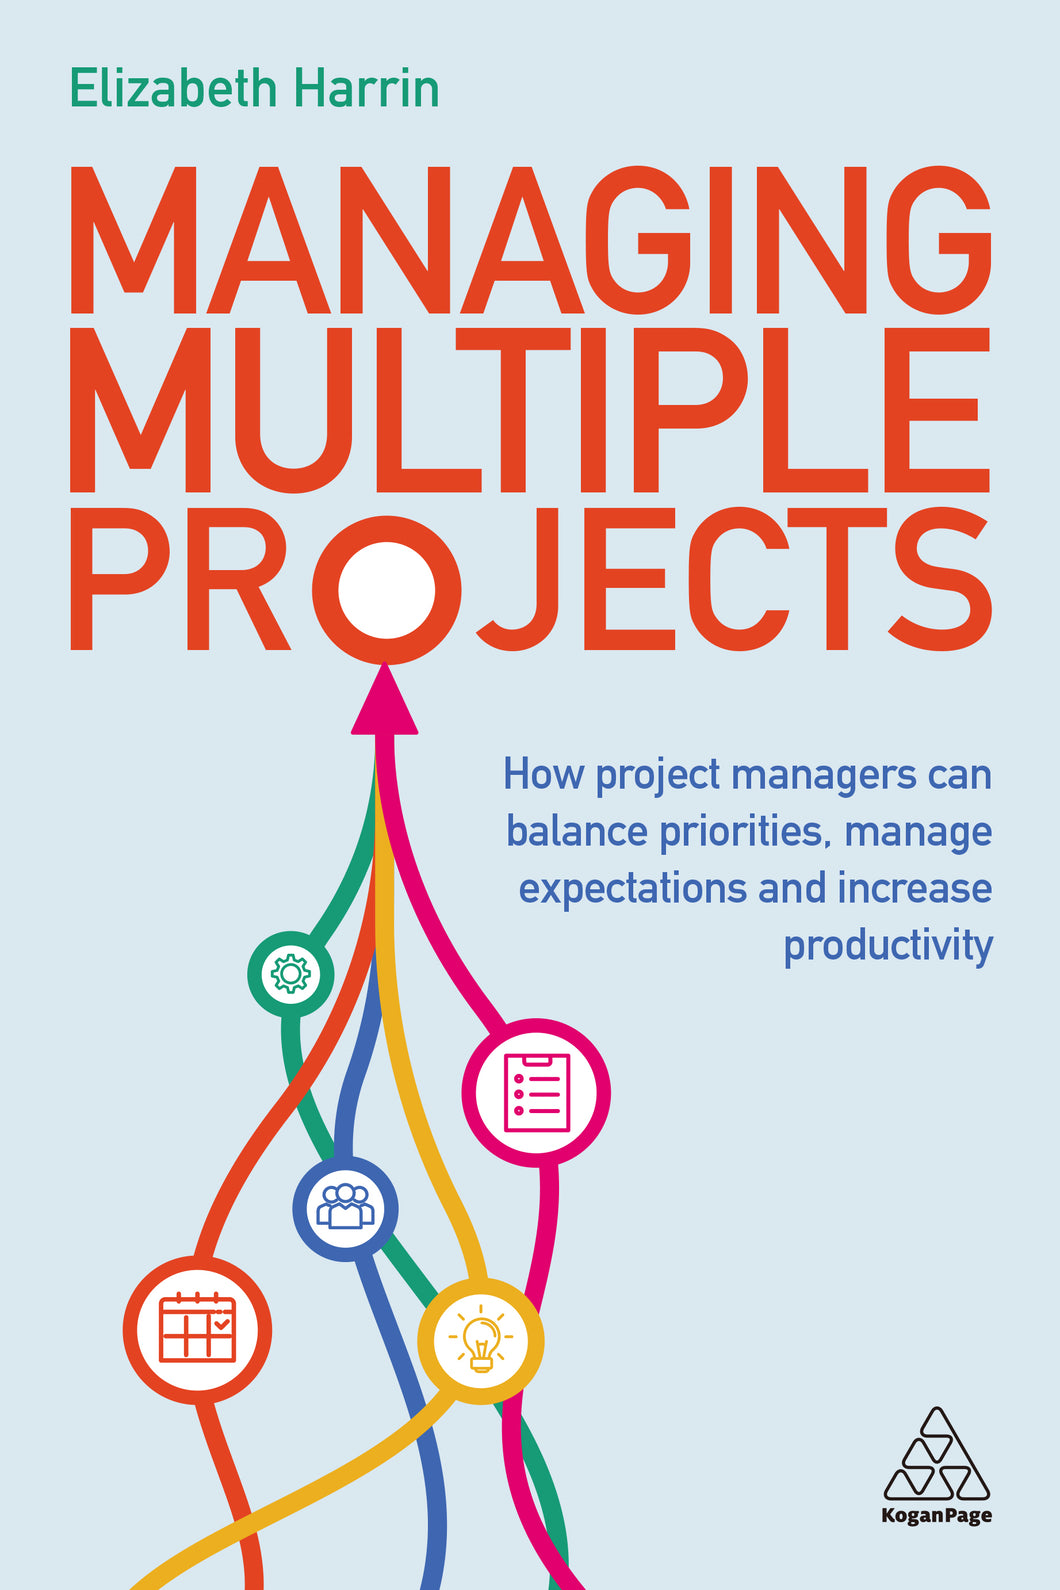 Managing Multiple Projects: How Project Managers Can Balance Priorities, Manage Expectations and Increase Productivity